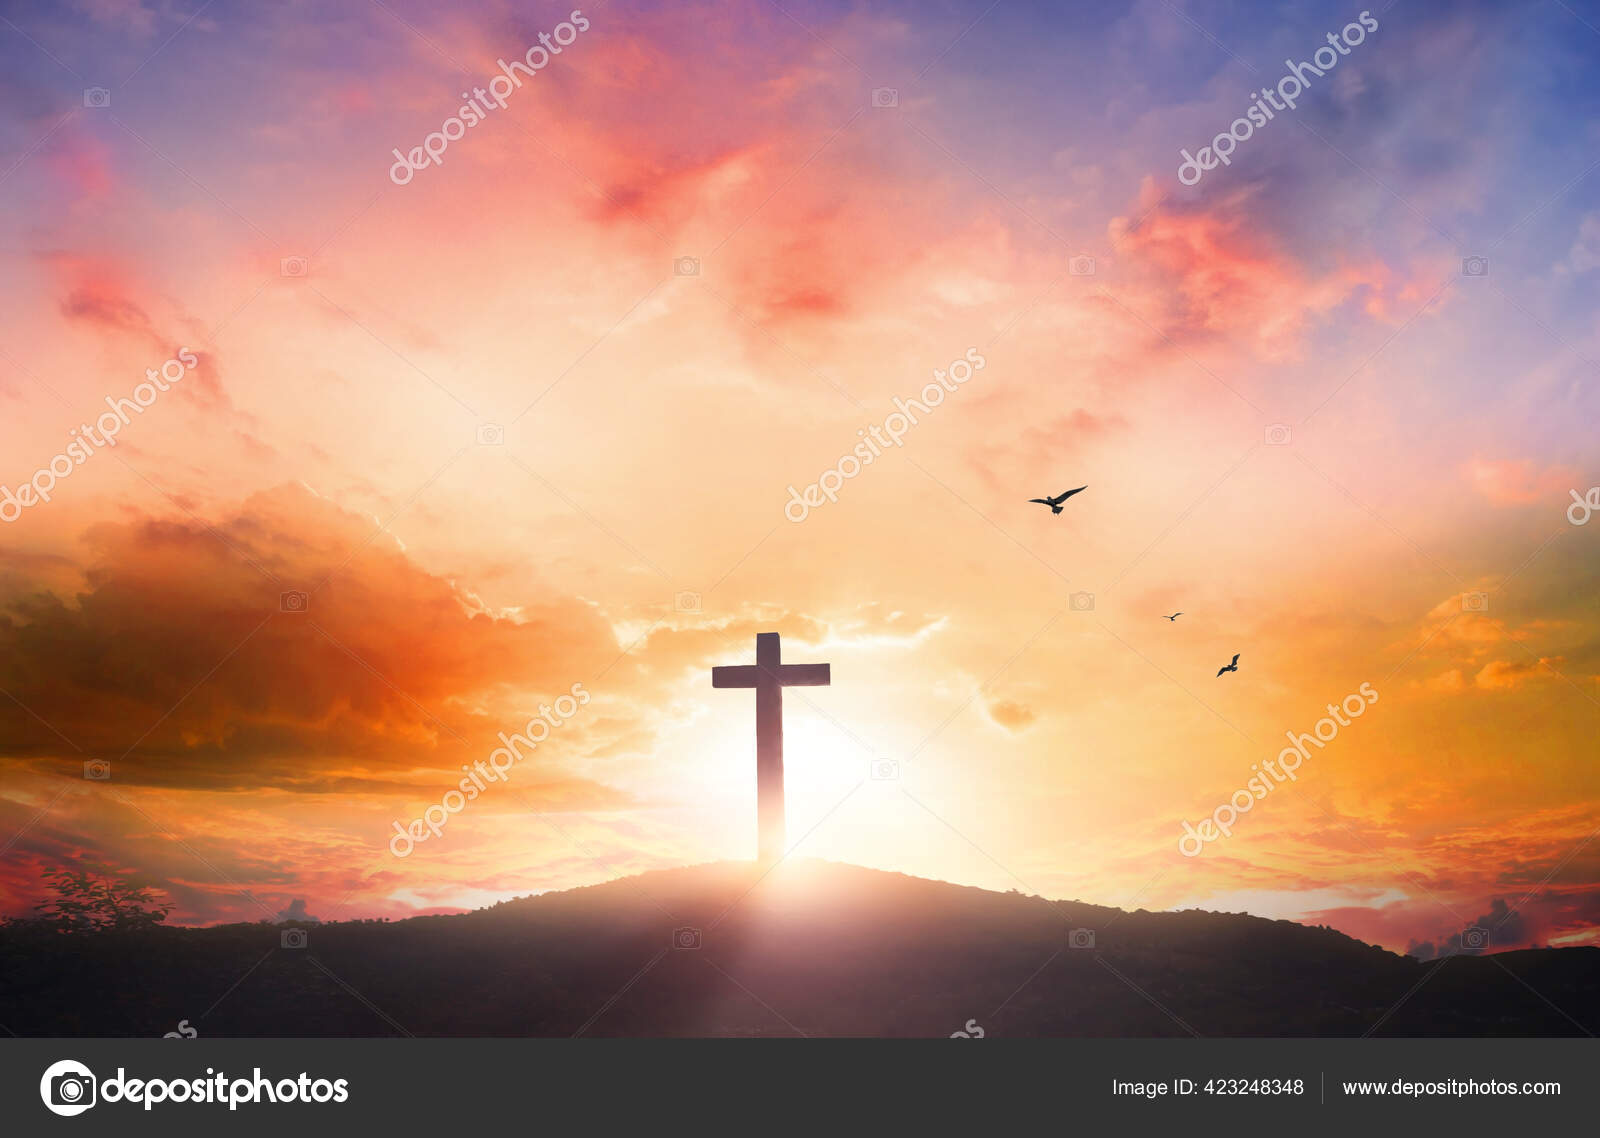 Good Friday Concept Silhouette Cross Mountain Sunset Background Stock Photo  by ©paulshuang 423248348